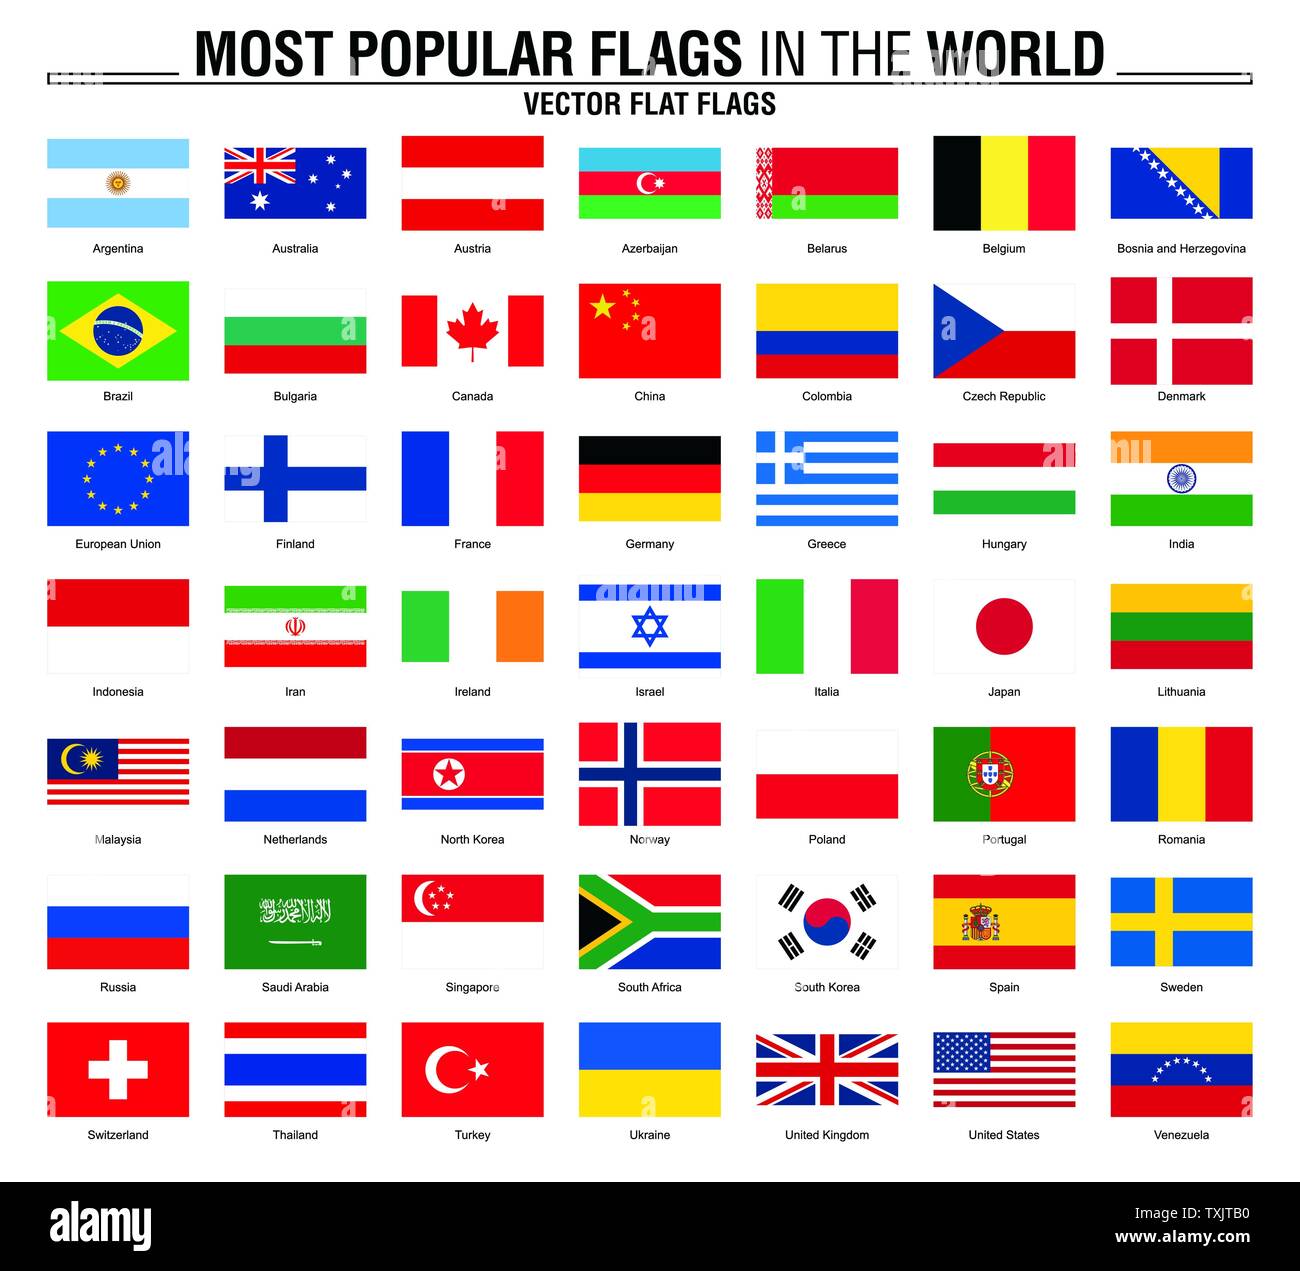 Most popular flags in the world. Flags on white background. Stock Vector